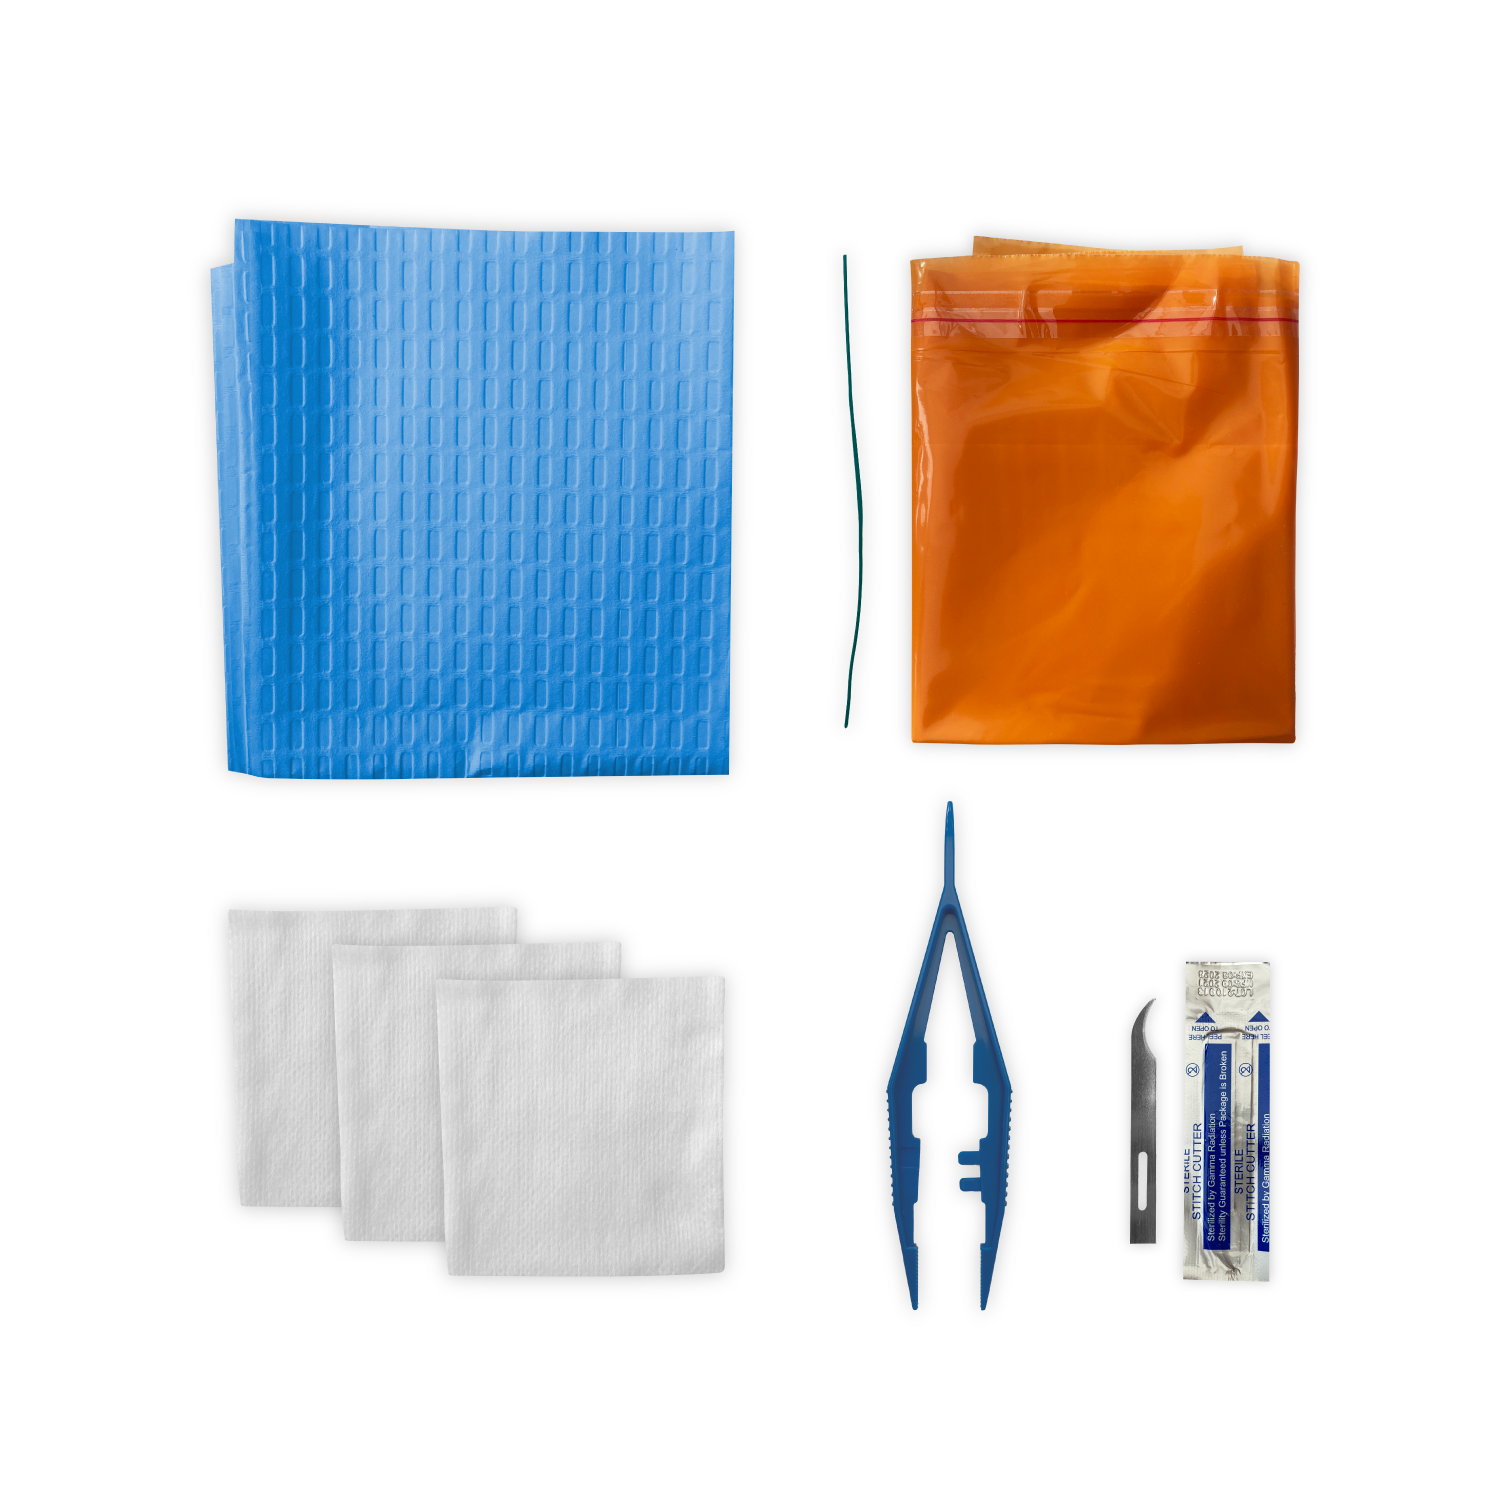 Instramed National Suture Removal Pack (2)